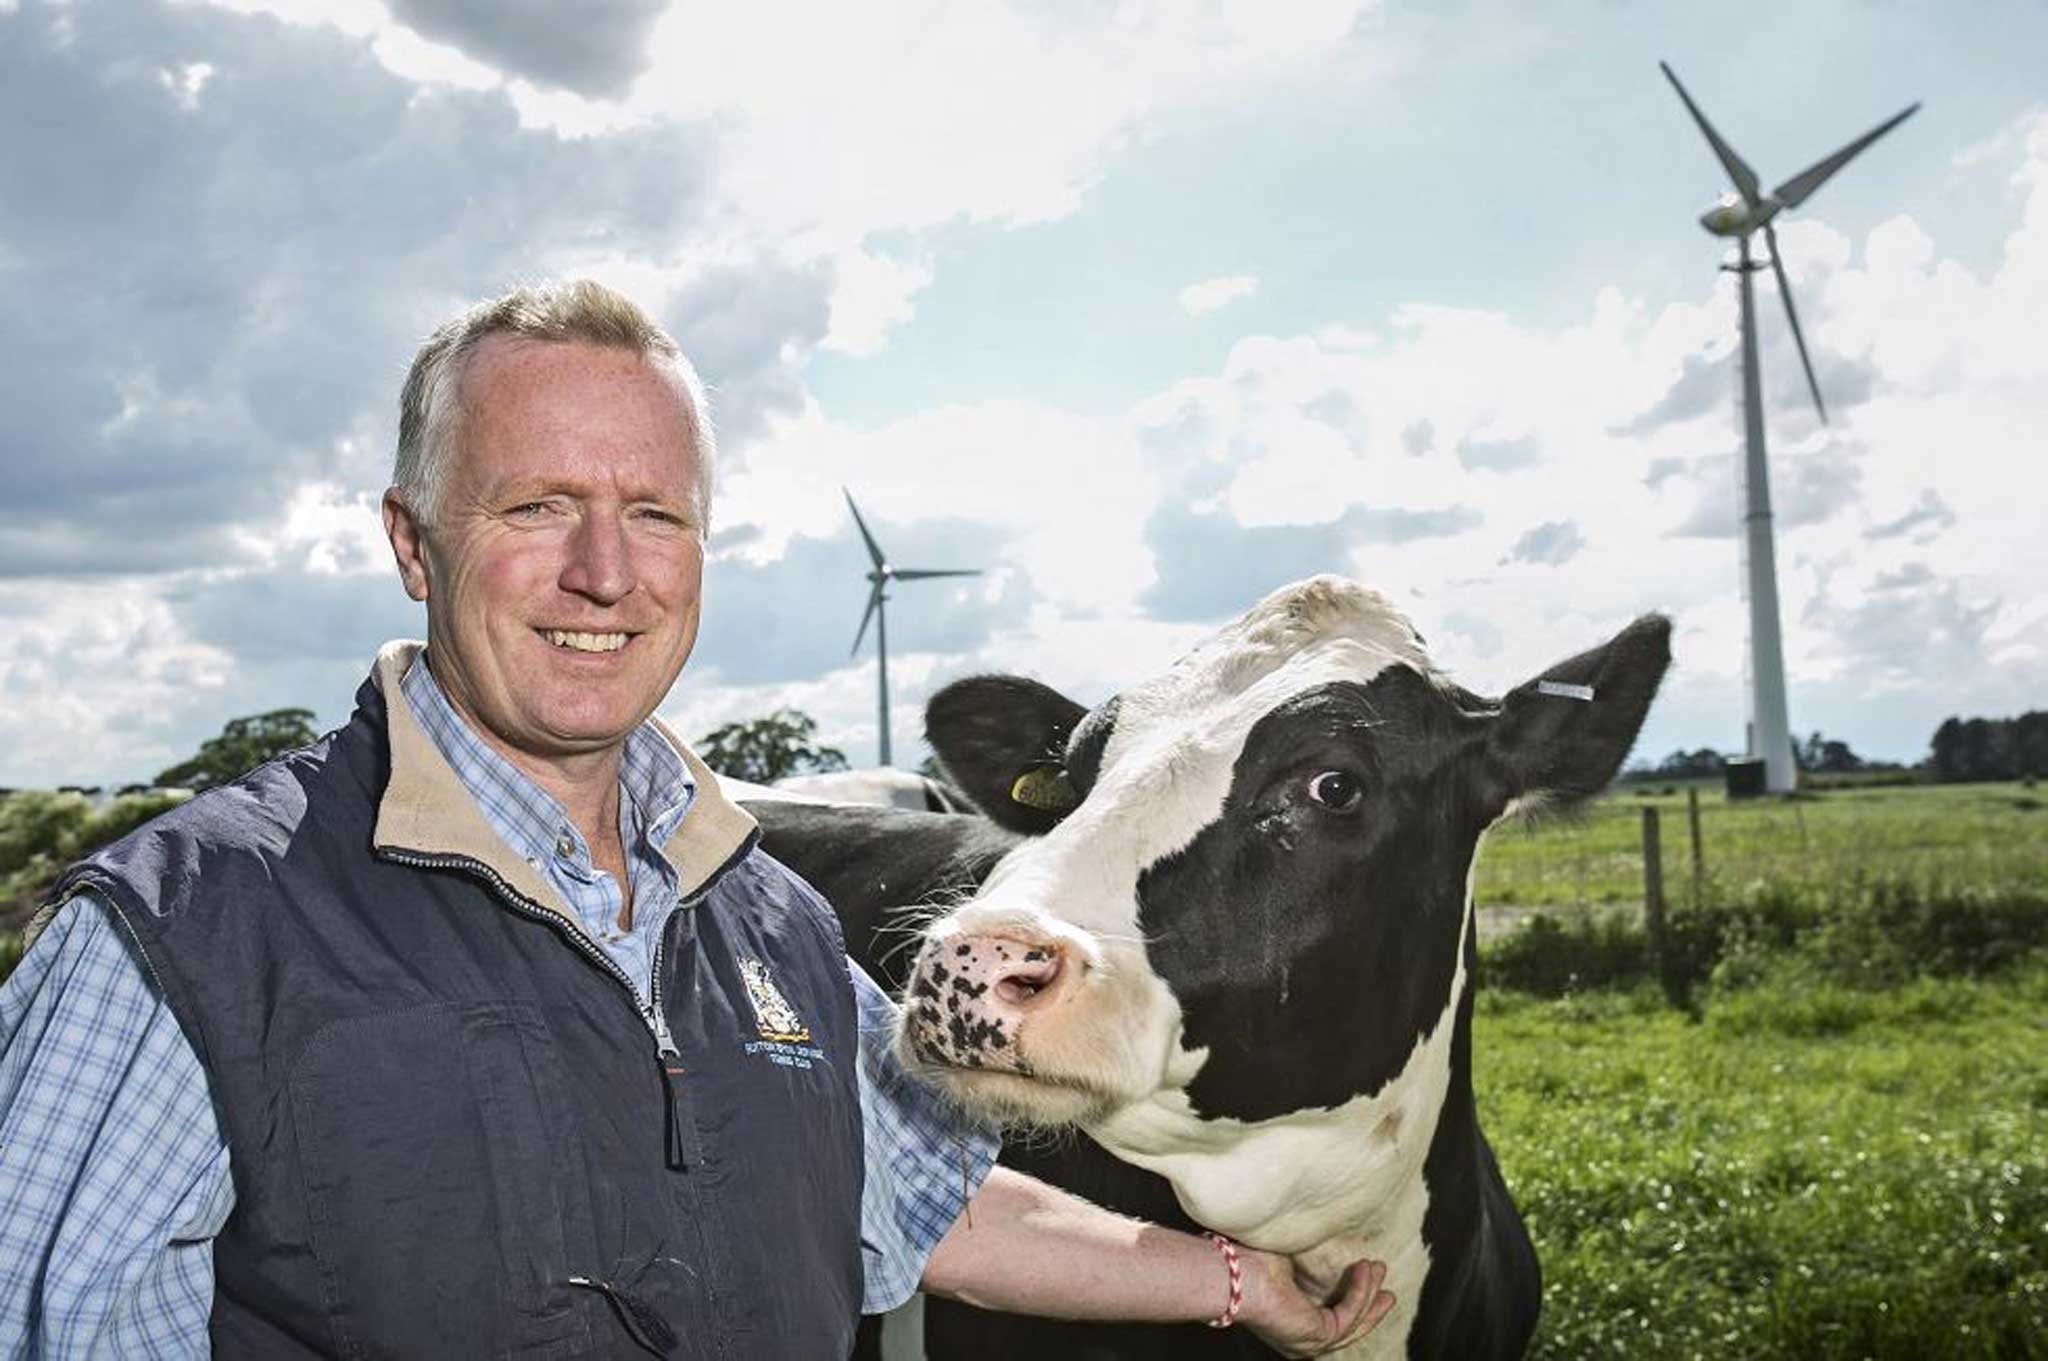 Two Endurance turbines are in operation on Chris Hobson's farm in Yorkshire. Investors can now catch the breeze with further wind projects